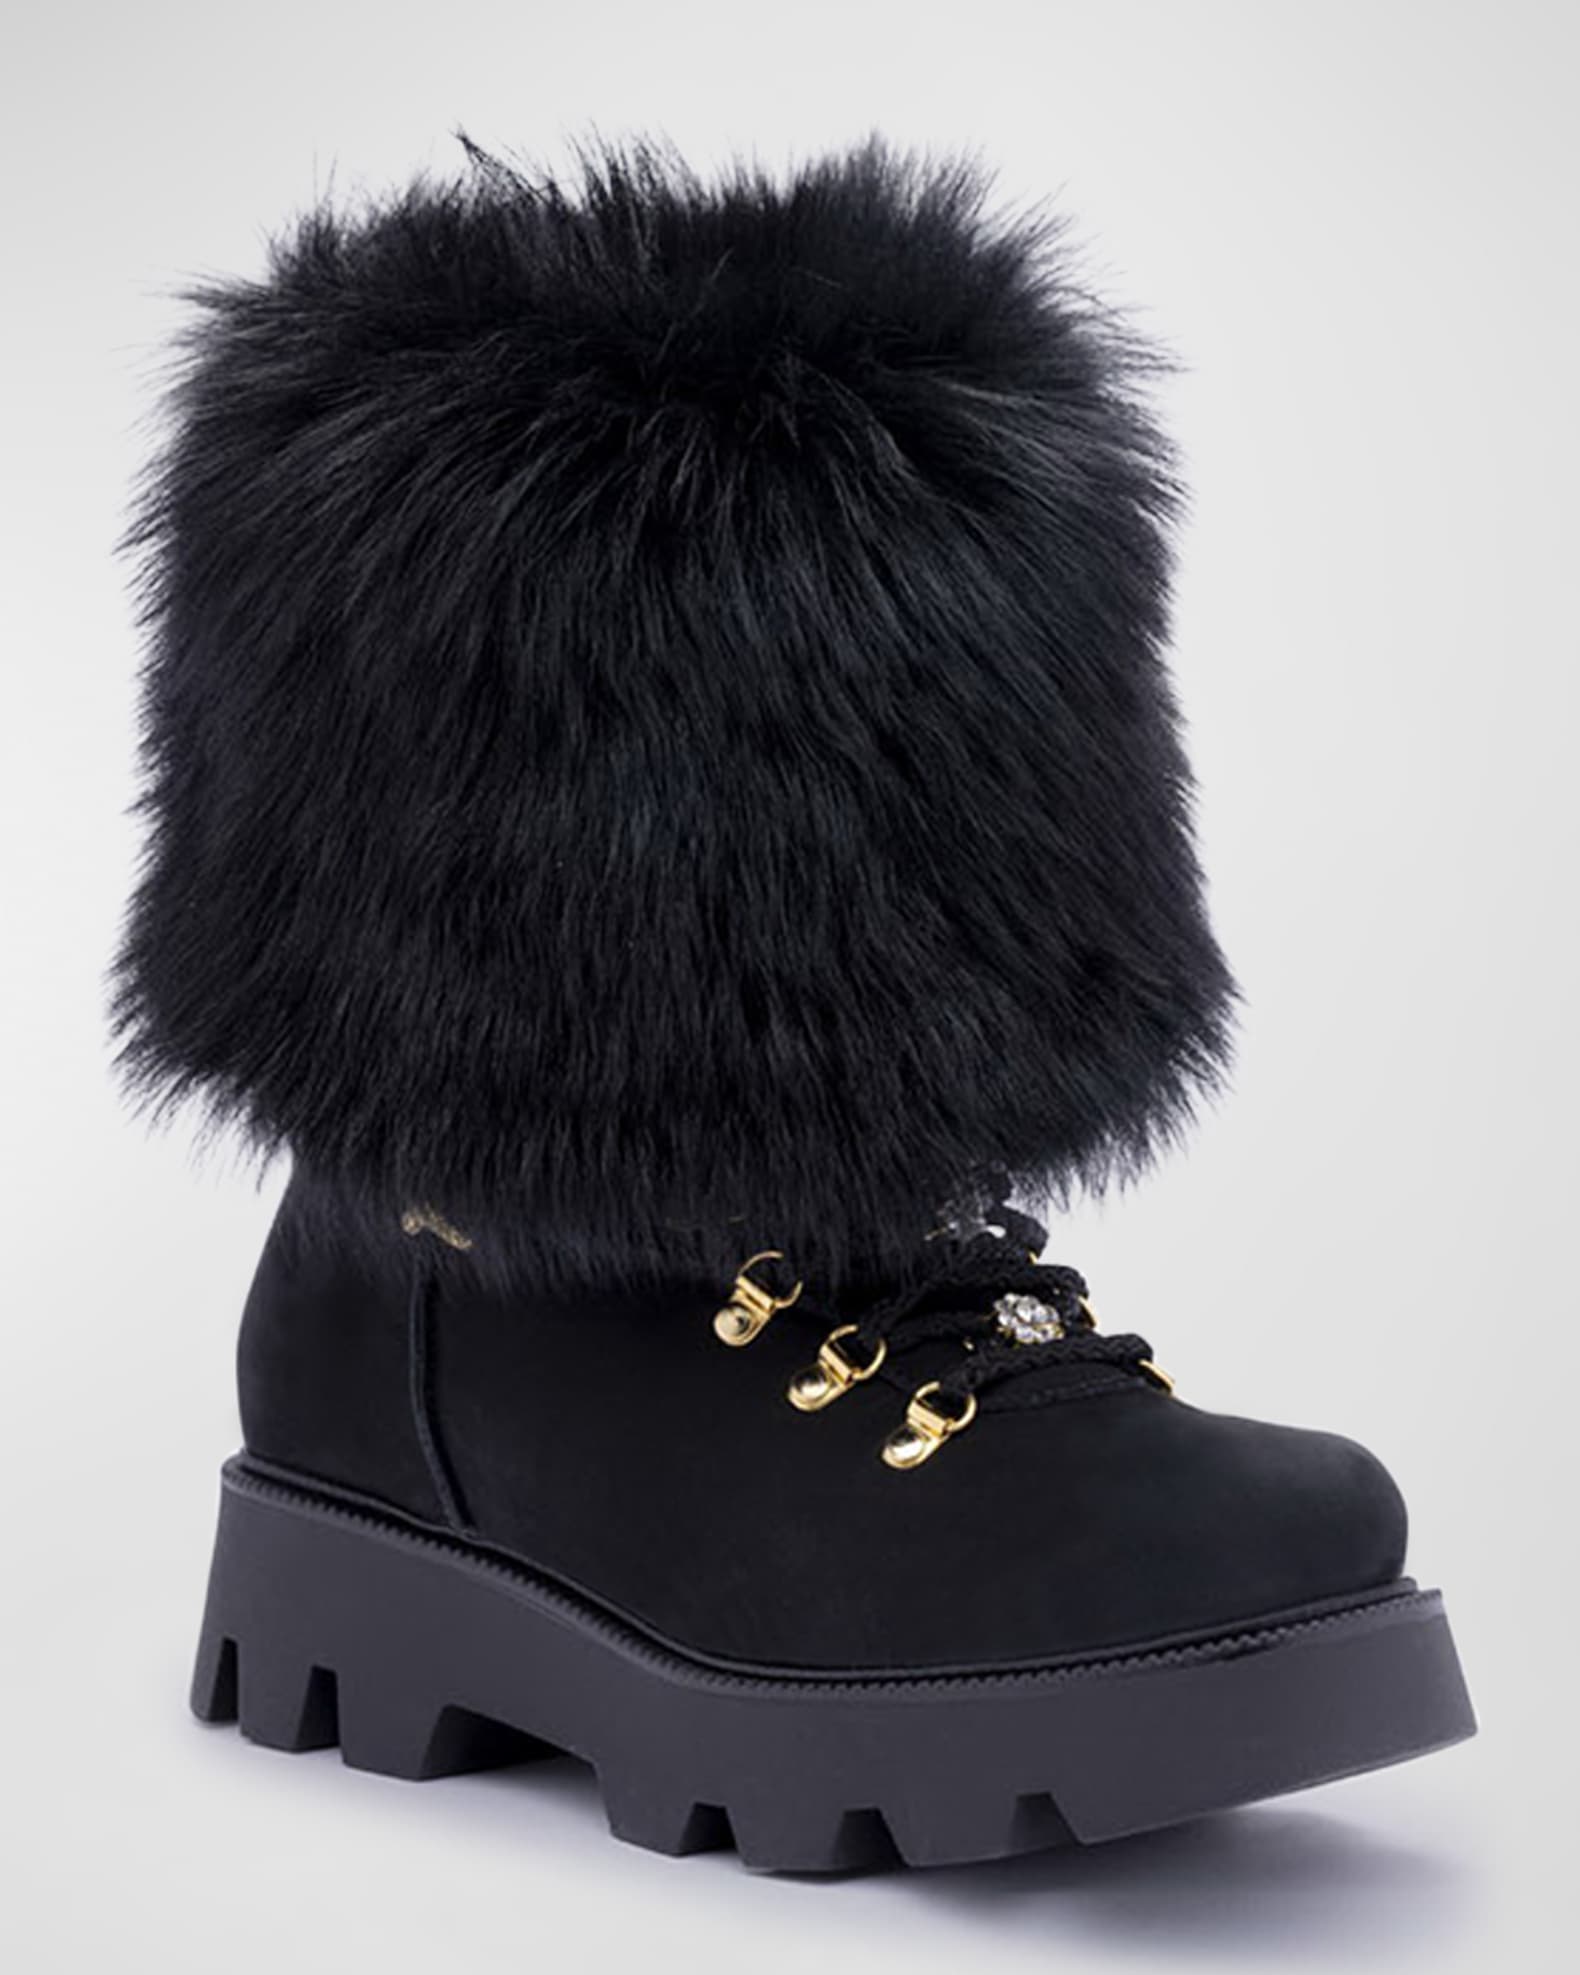 Montelliana 1965 Shearling-Lined Suede Hiking Boots | Neiman Marcus